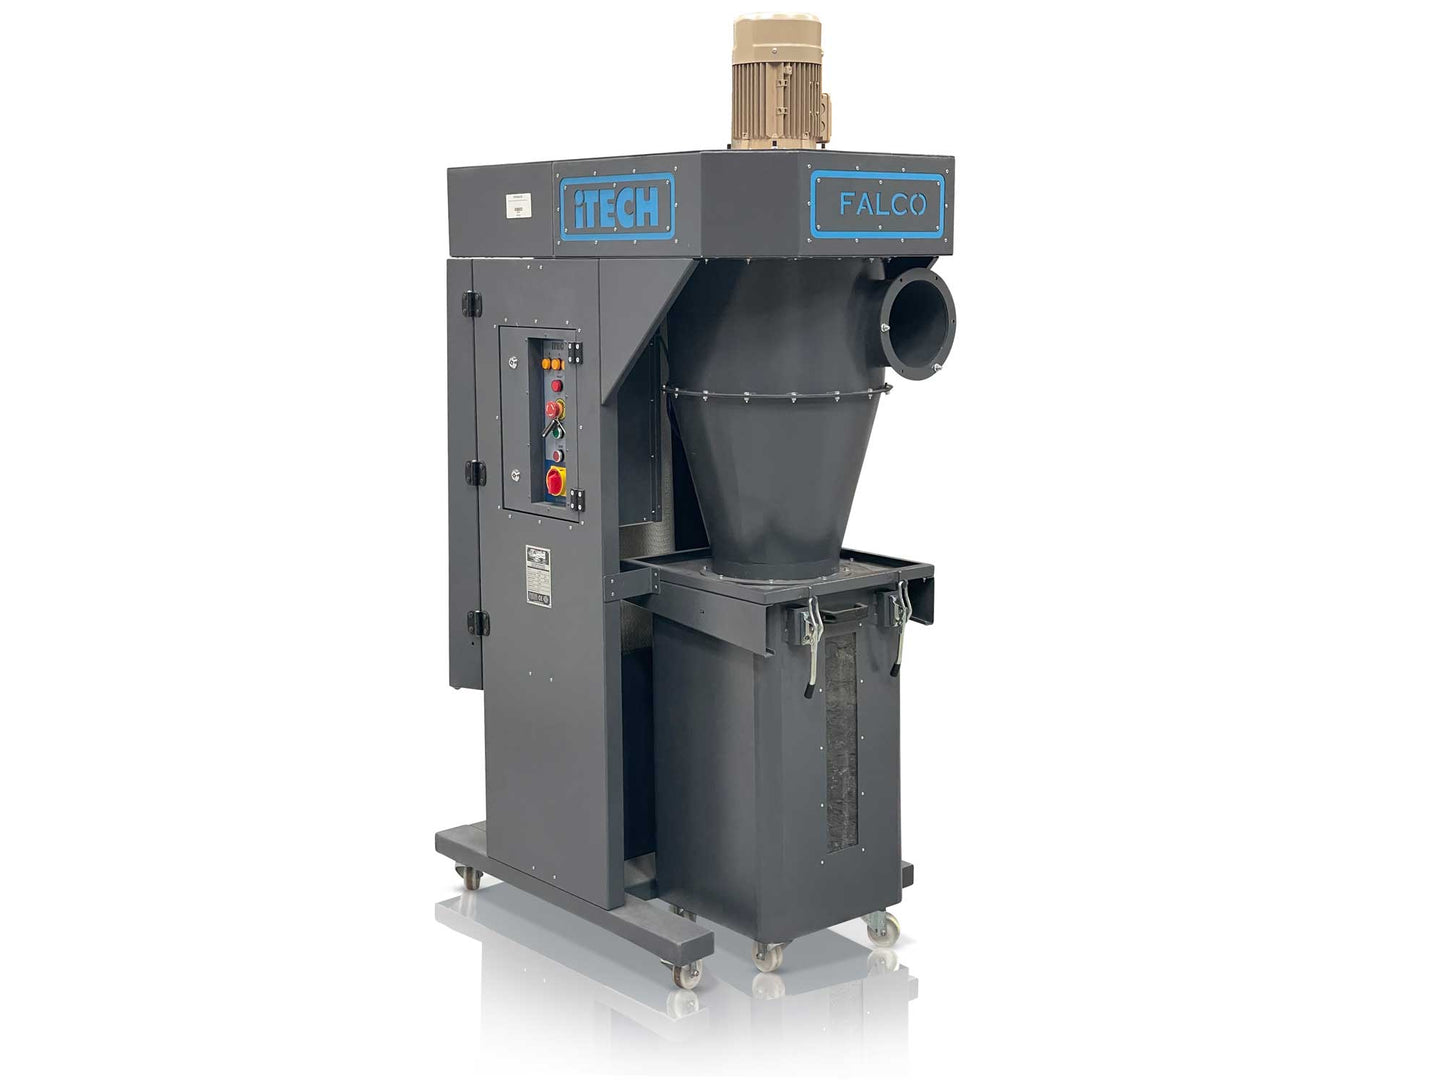 FALCO 2 CYCLONE DUST EXTRACTOR 230v 1 ph